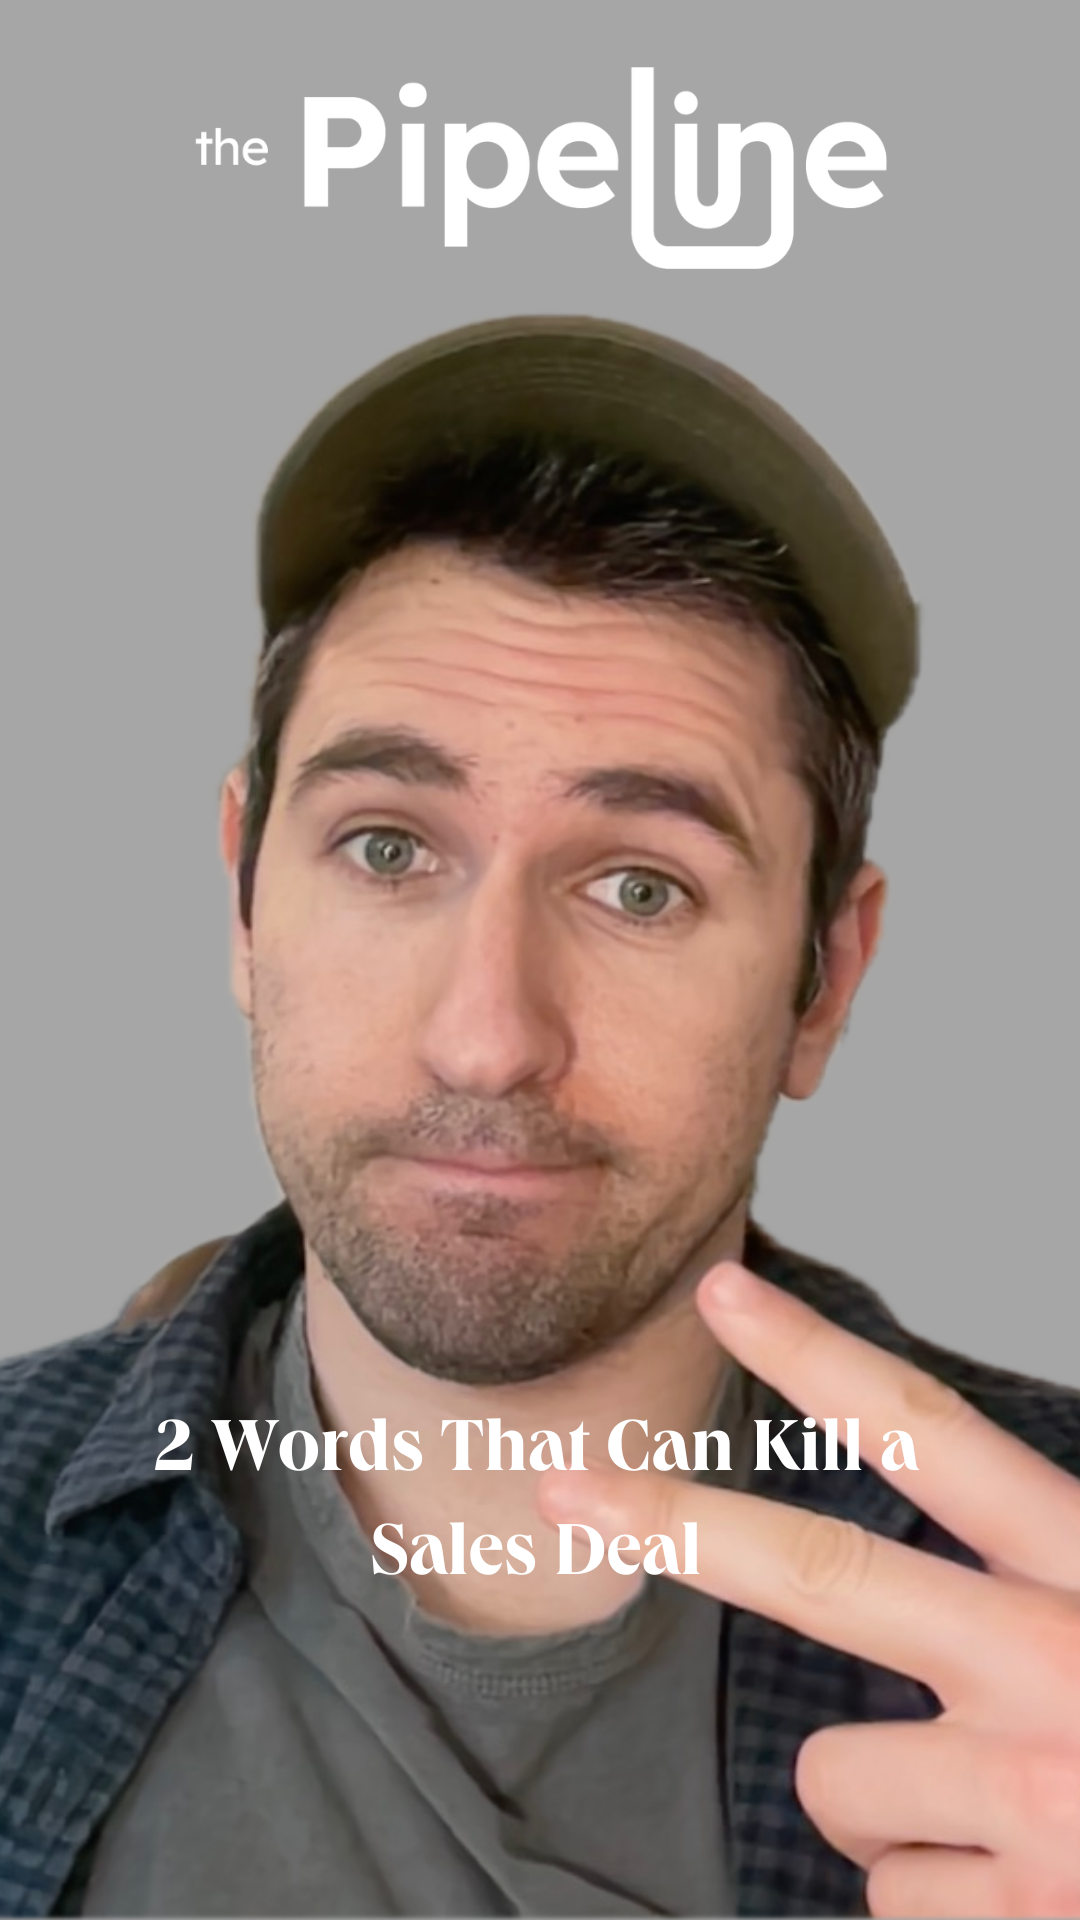 2 Words That Can Kill a Sales Deal (2)